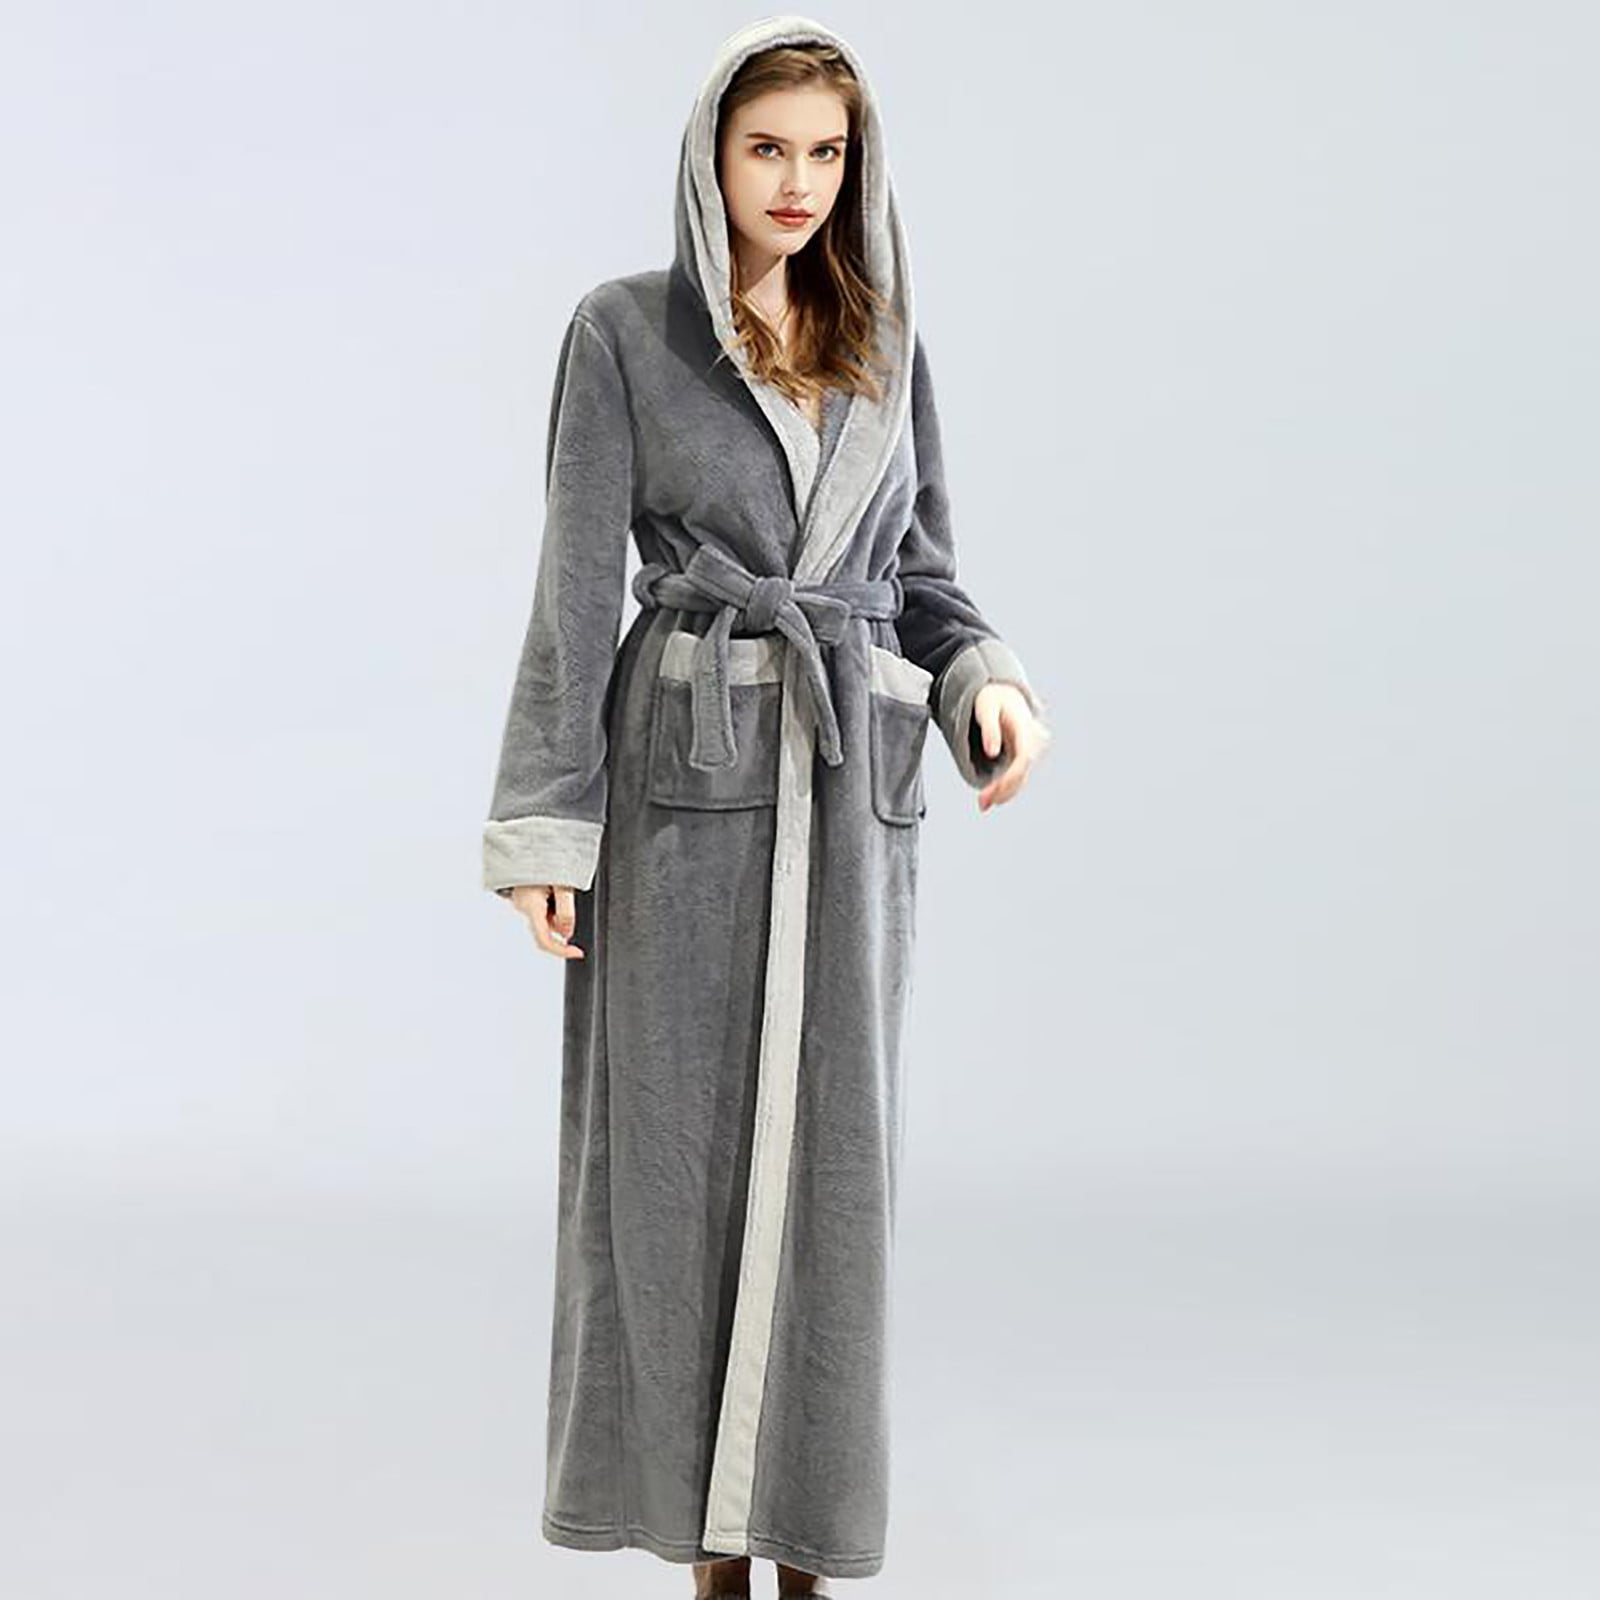 Robes For Women Couples Winter Lengthened Bathrobe Splicing Home